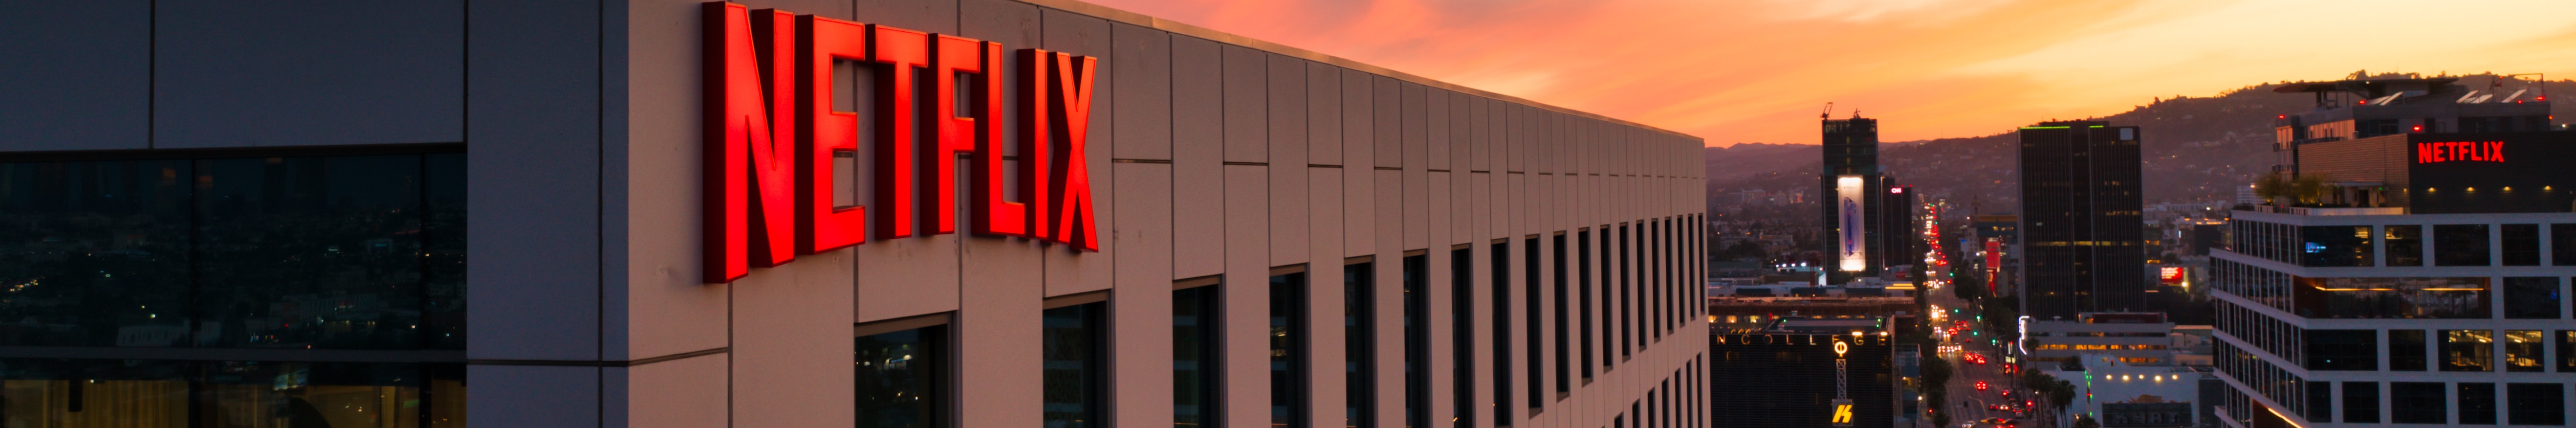 Netflix fined $21.74 Mn for collecting personal information of 5 Mn people without their consent